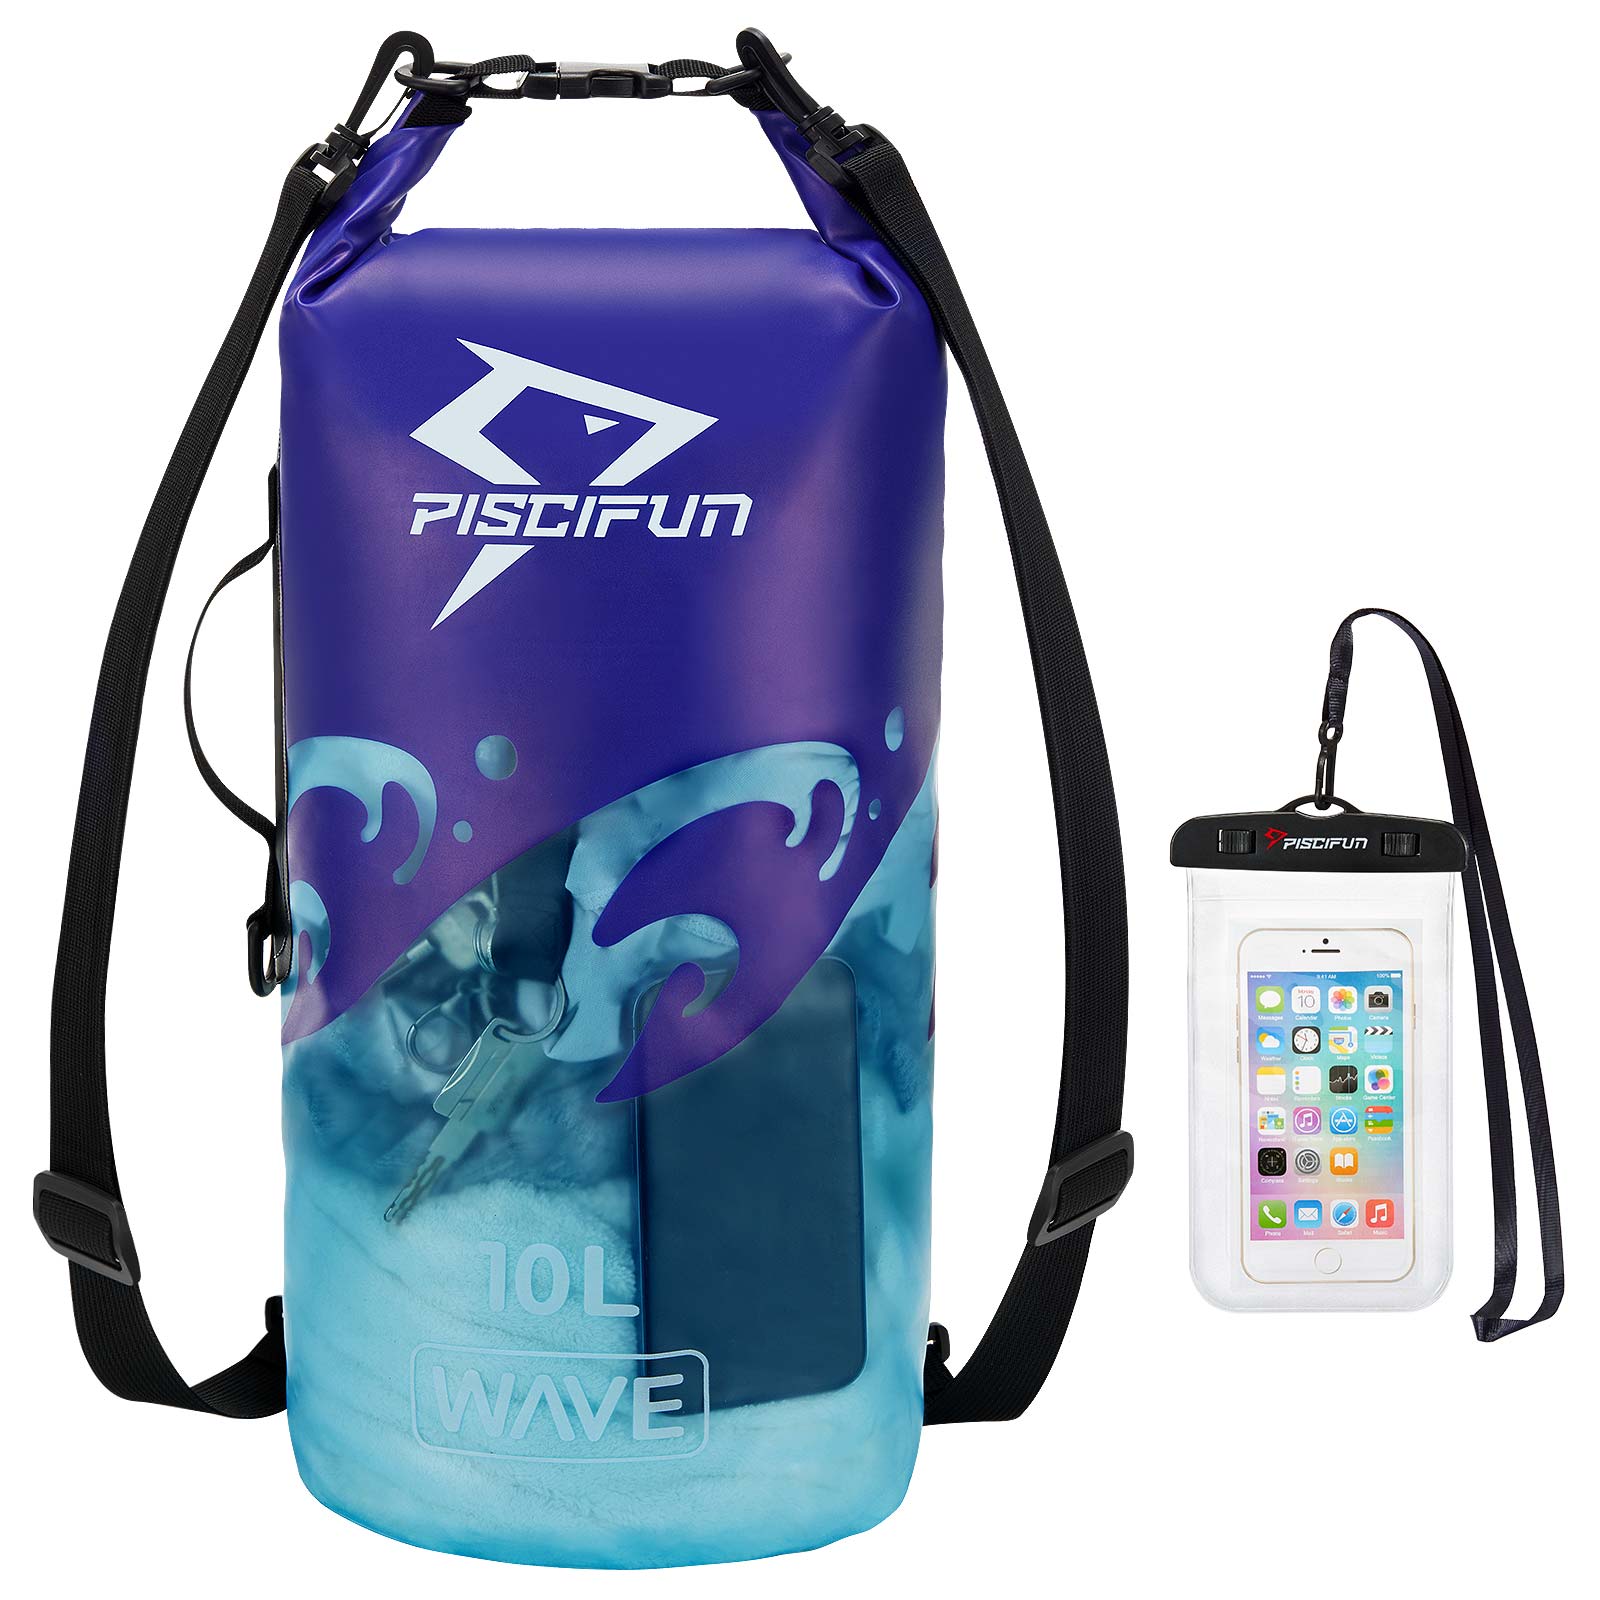 Lightahead Transparent Waterproof Dry Bag 10L with Free phone carrying